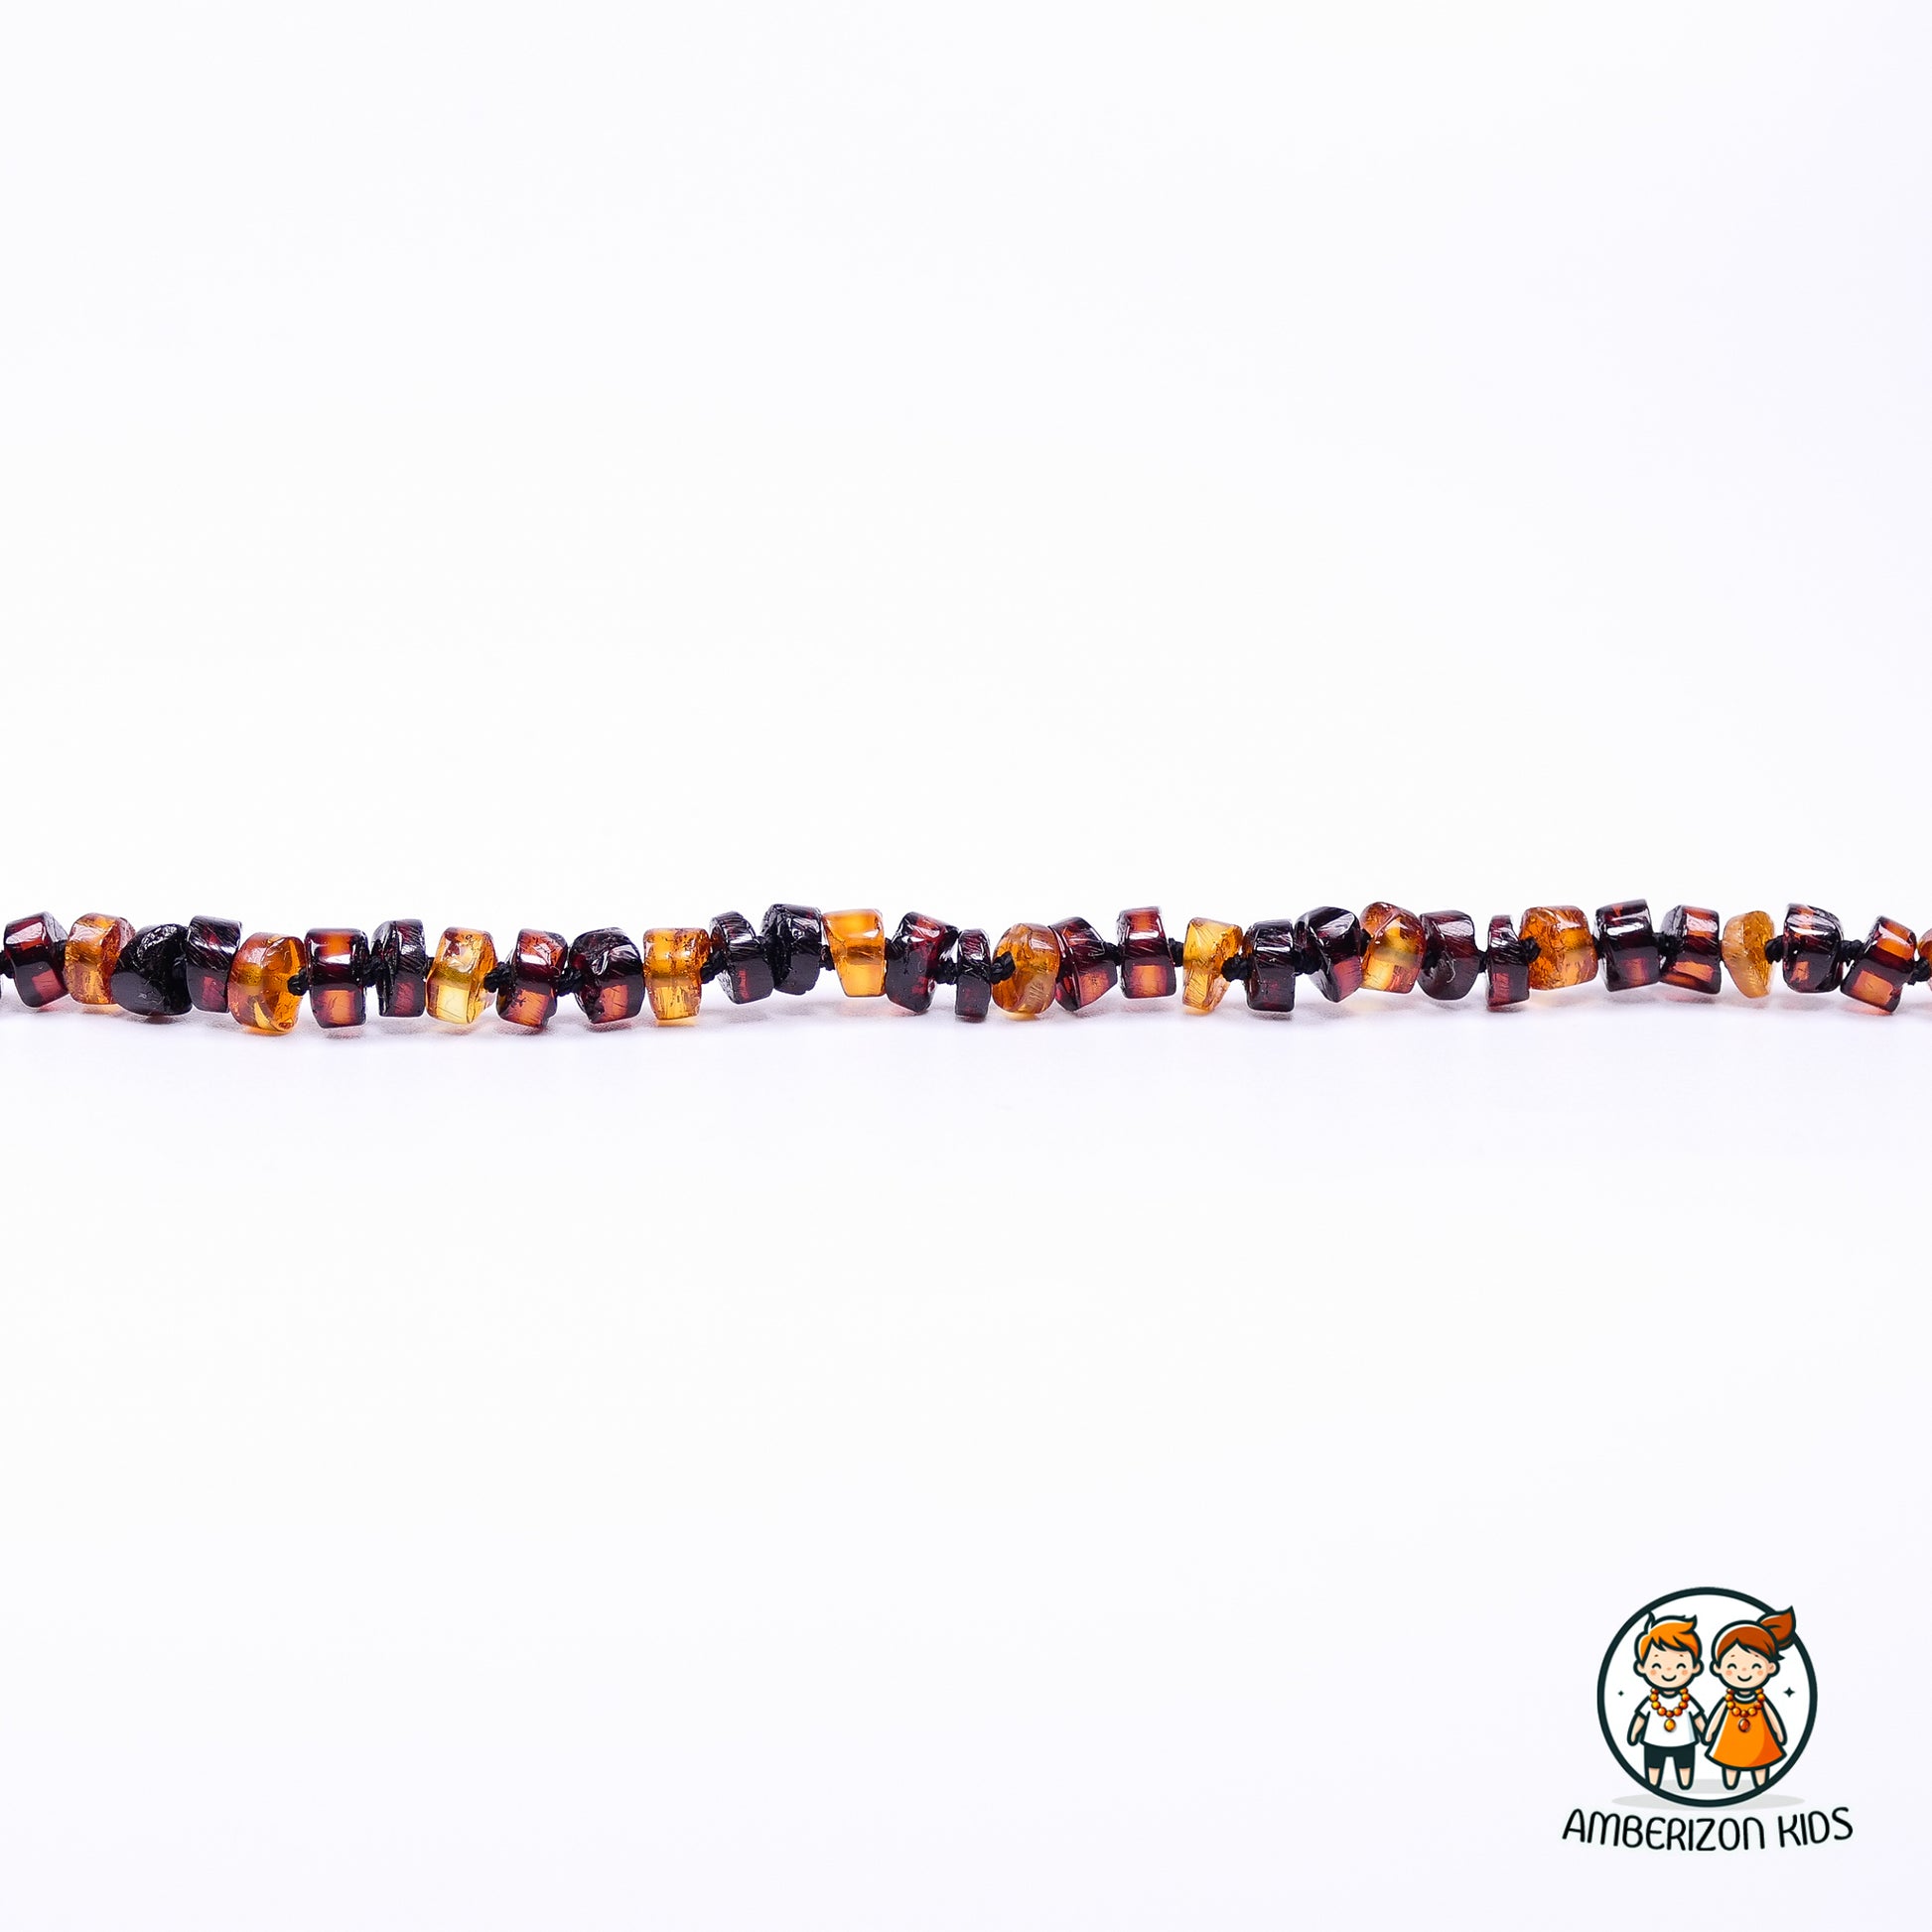 Amber Teething Jewelry: Calming Beads for Baby's Comfort